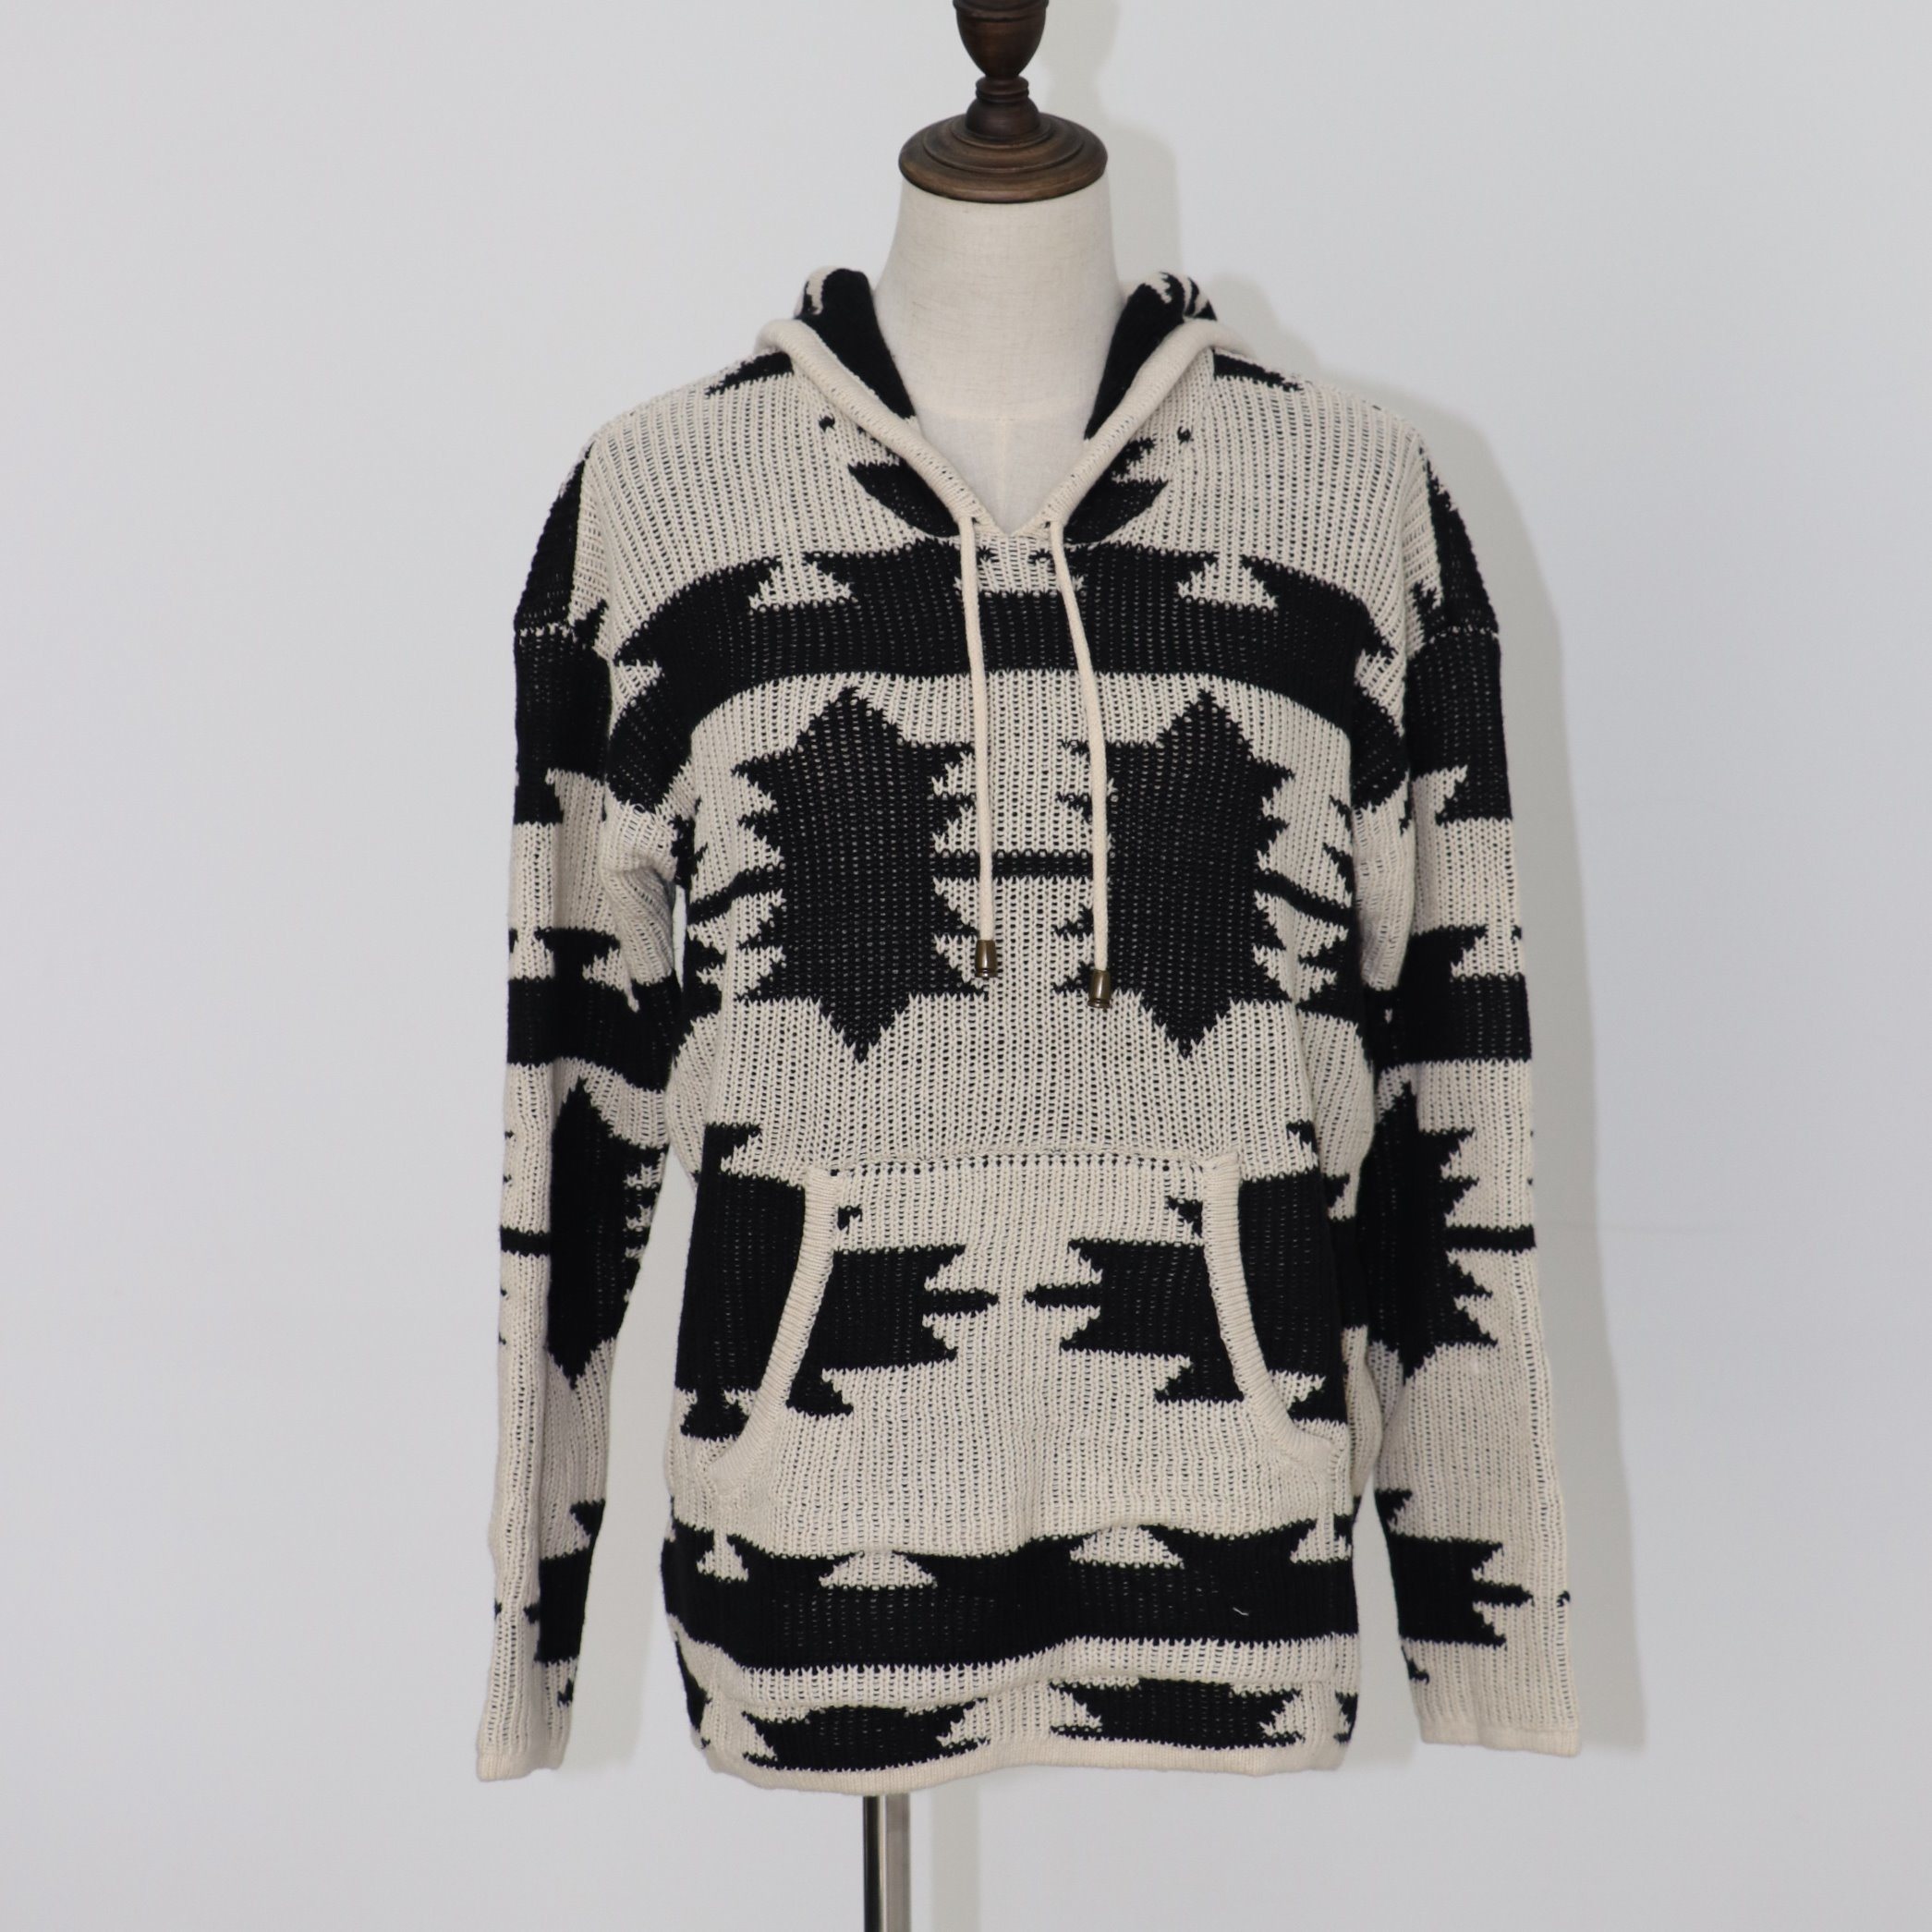 Women's Hoodie Pullover Jacket in Heavy Guage Intarsia Design with Long Sleeves and Pockets